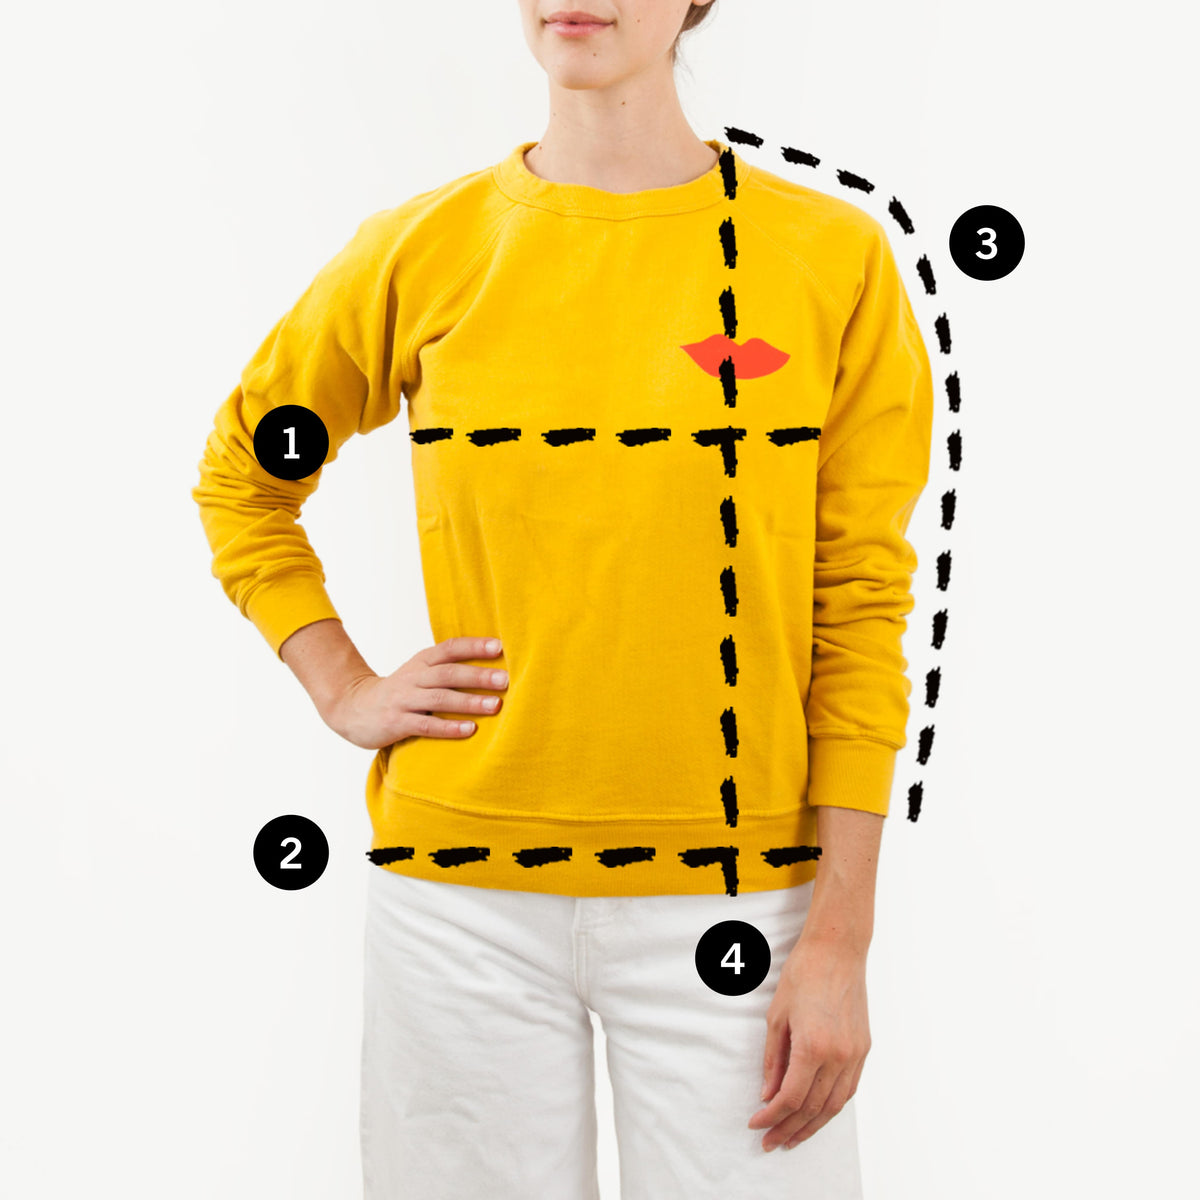 image of Frannie in a yellow sweatshirt with 4 lines depicting where the user should measure for their bust, sweep, sleeve and length measurements in comparison to the garment